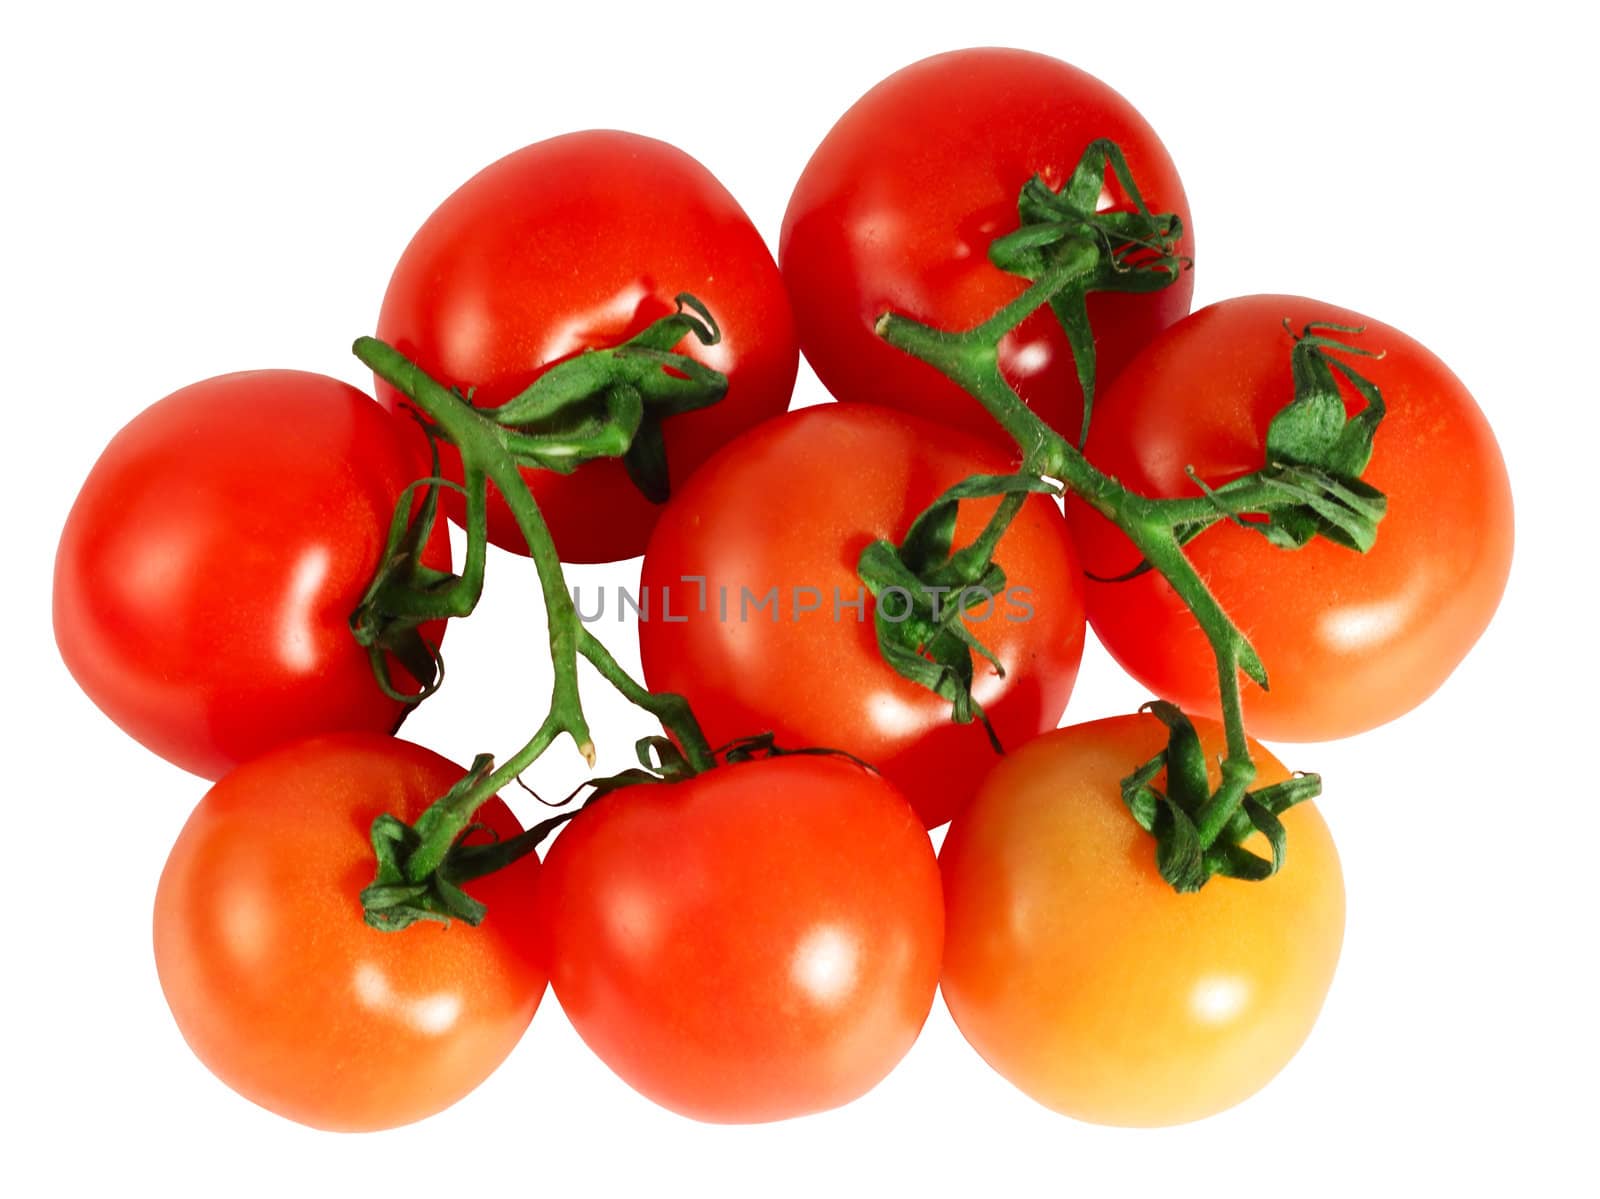 Red tomatoes on branch by destillat